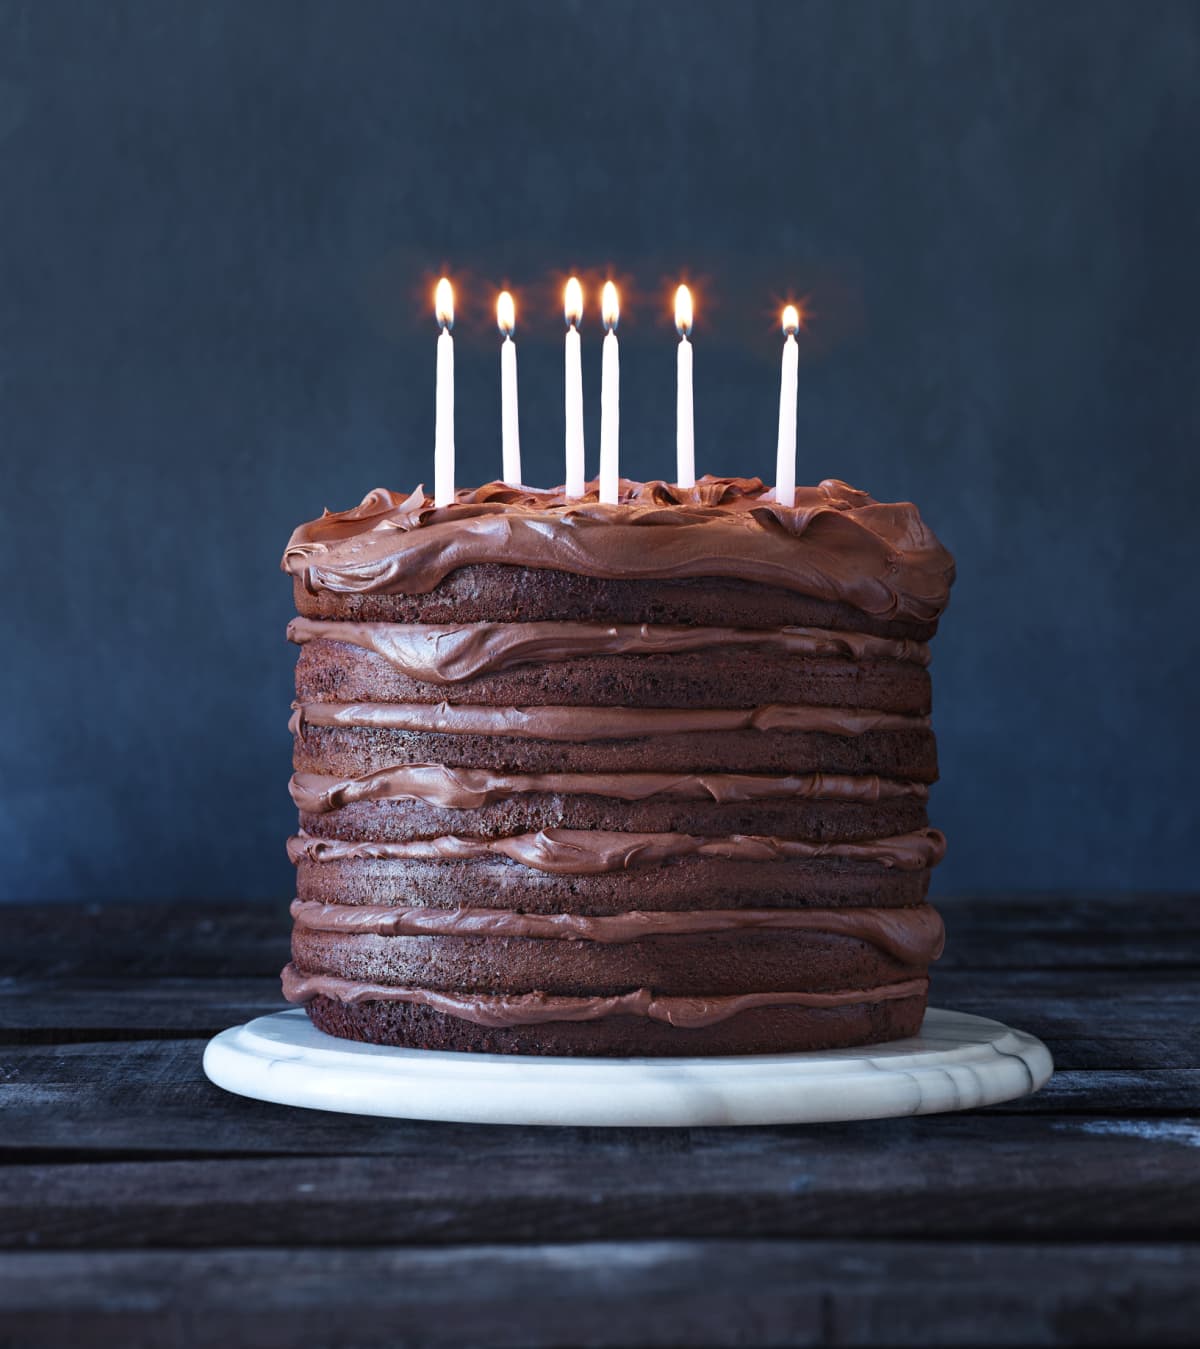 A chocolate cake with candles